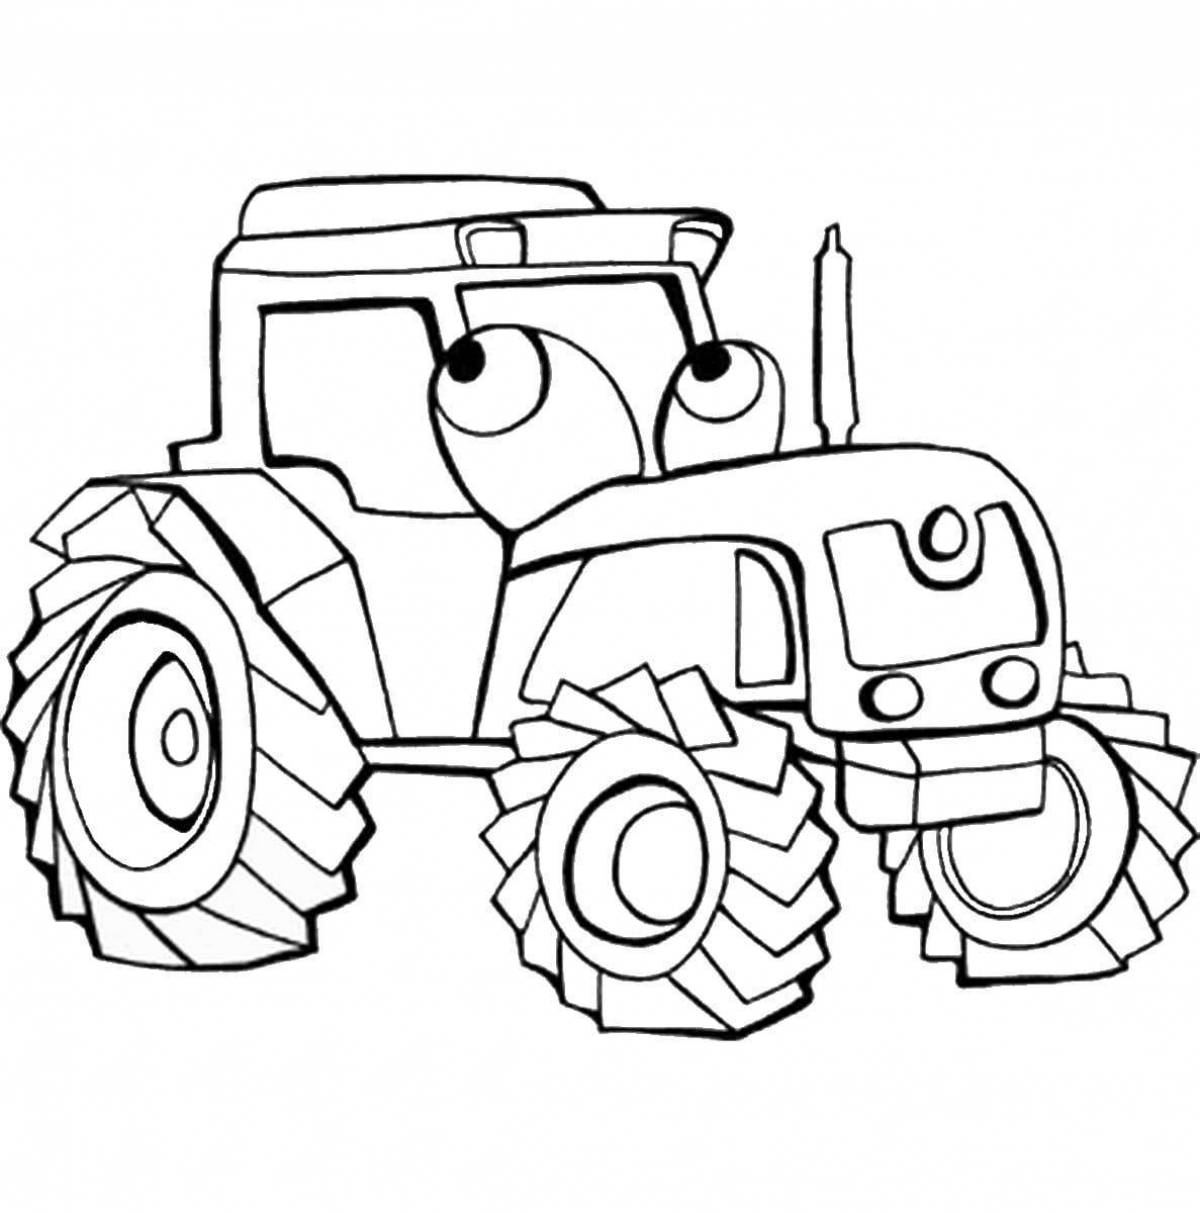 Interesting gosh tractor coloring page